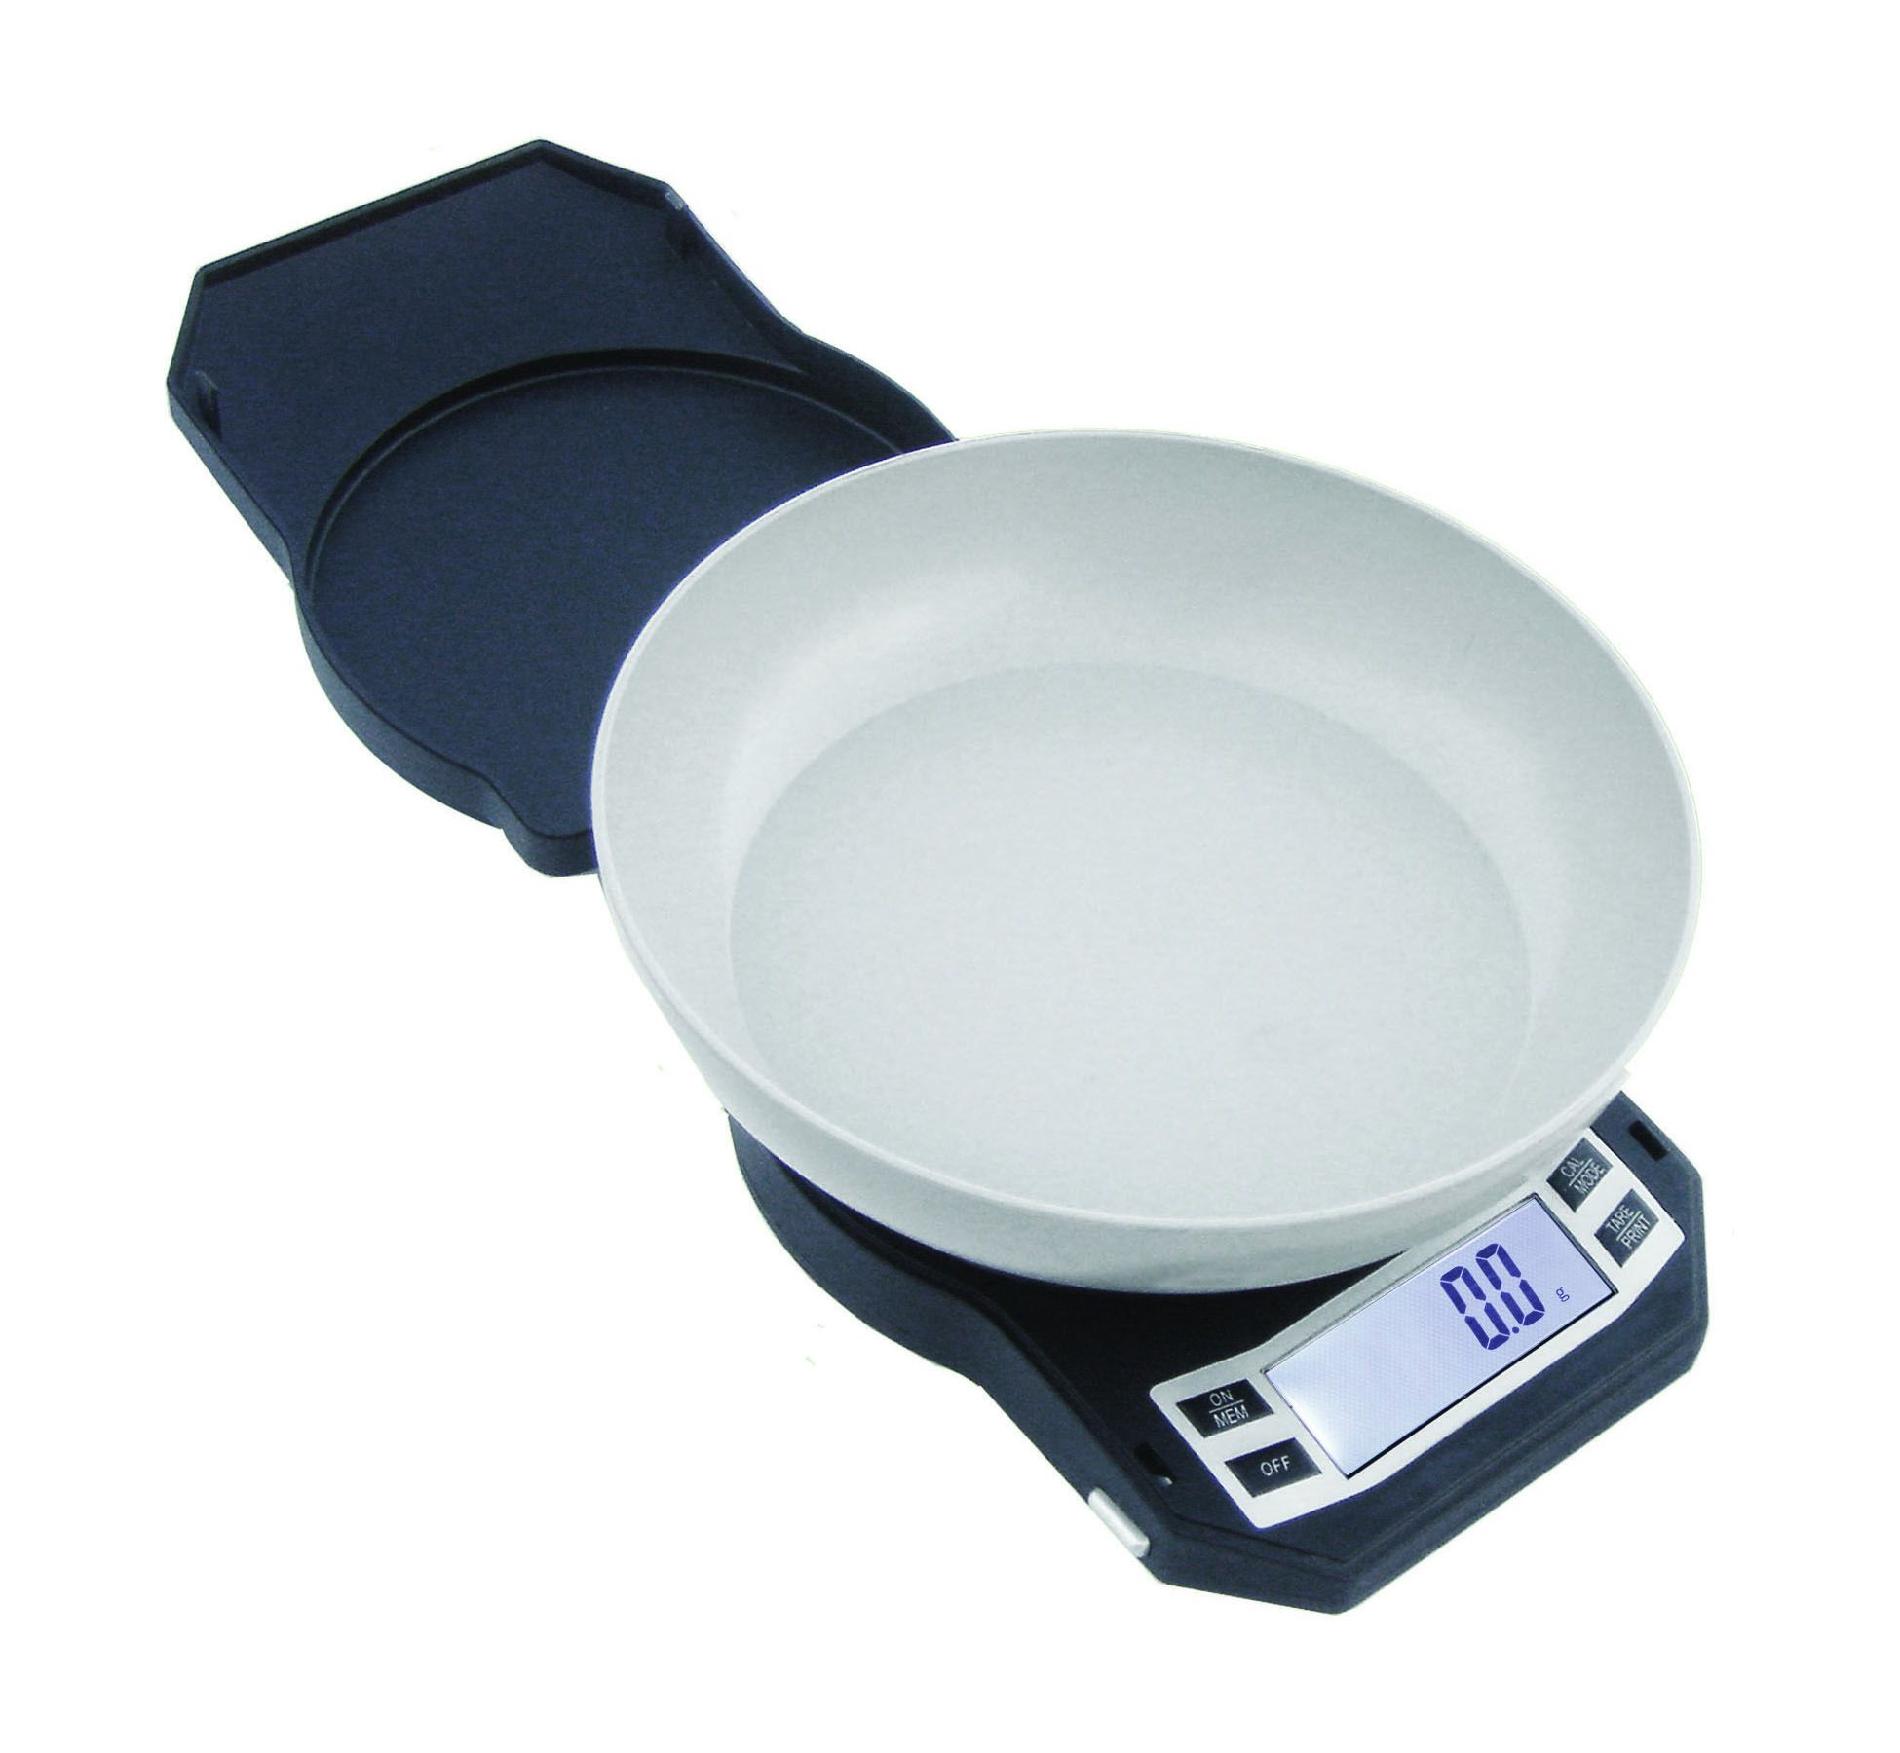 American Weigh Scales Precision Kitchen Bowl Scale   Home   Kitchen